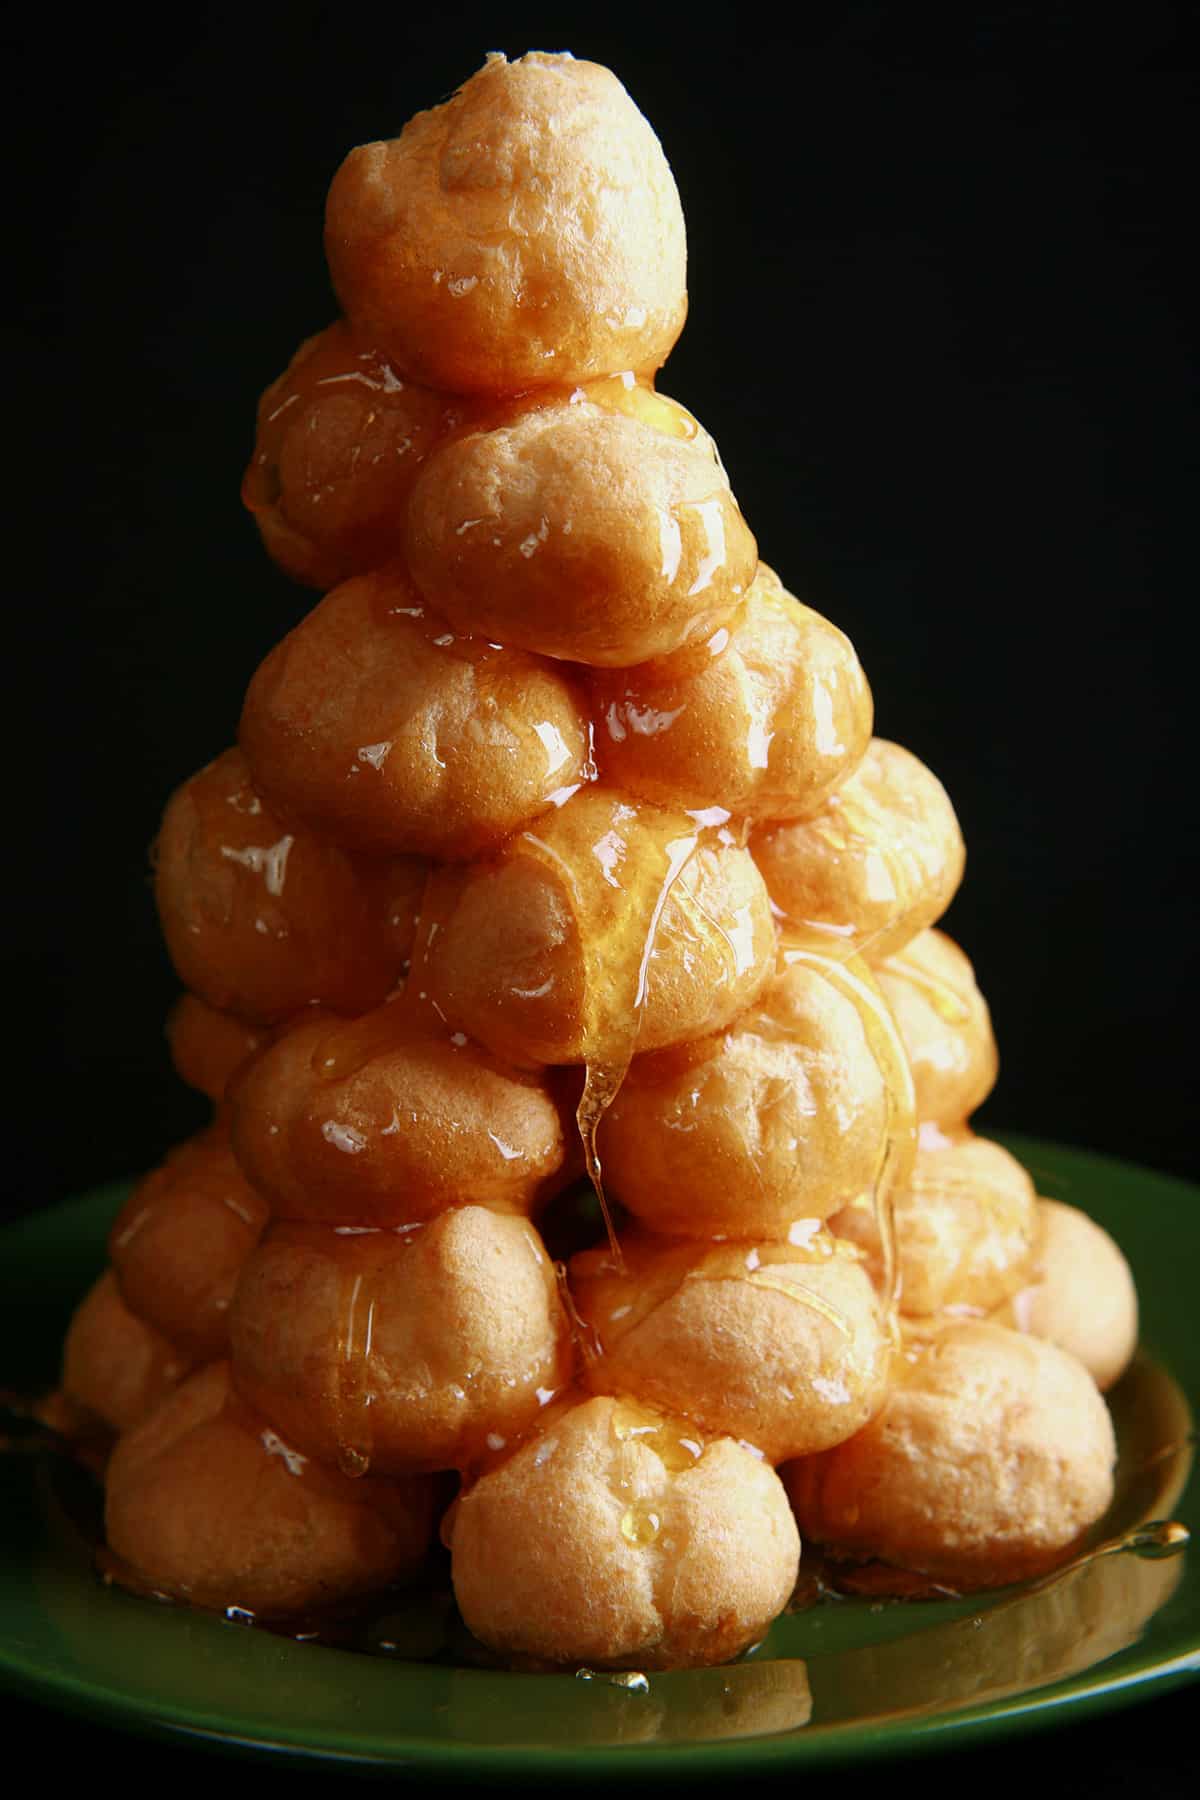 A croquembouche pastry tower with caramel shown dripping between layers.